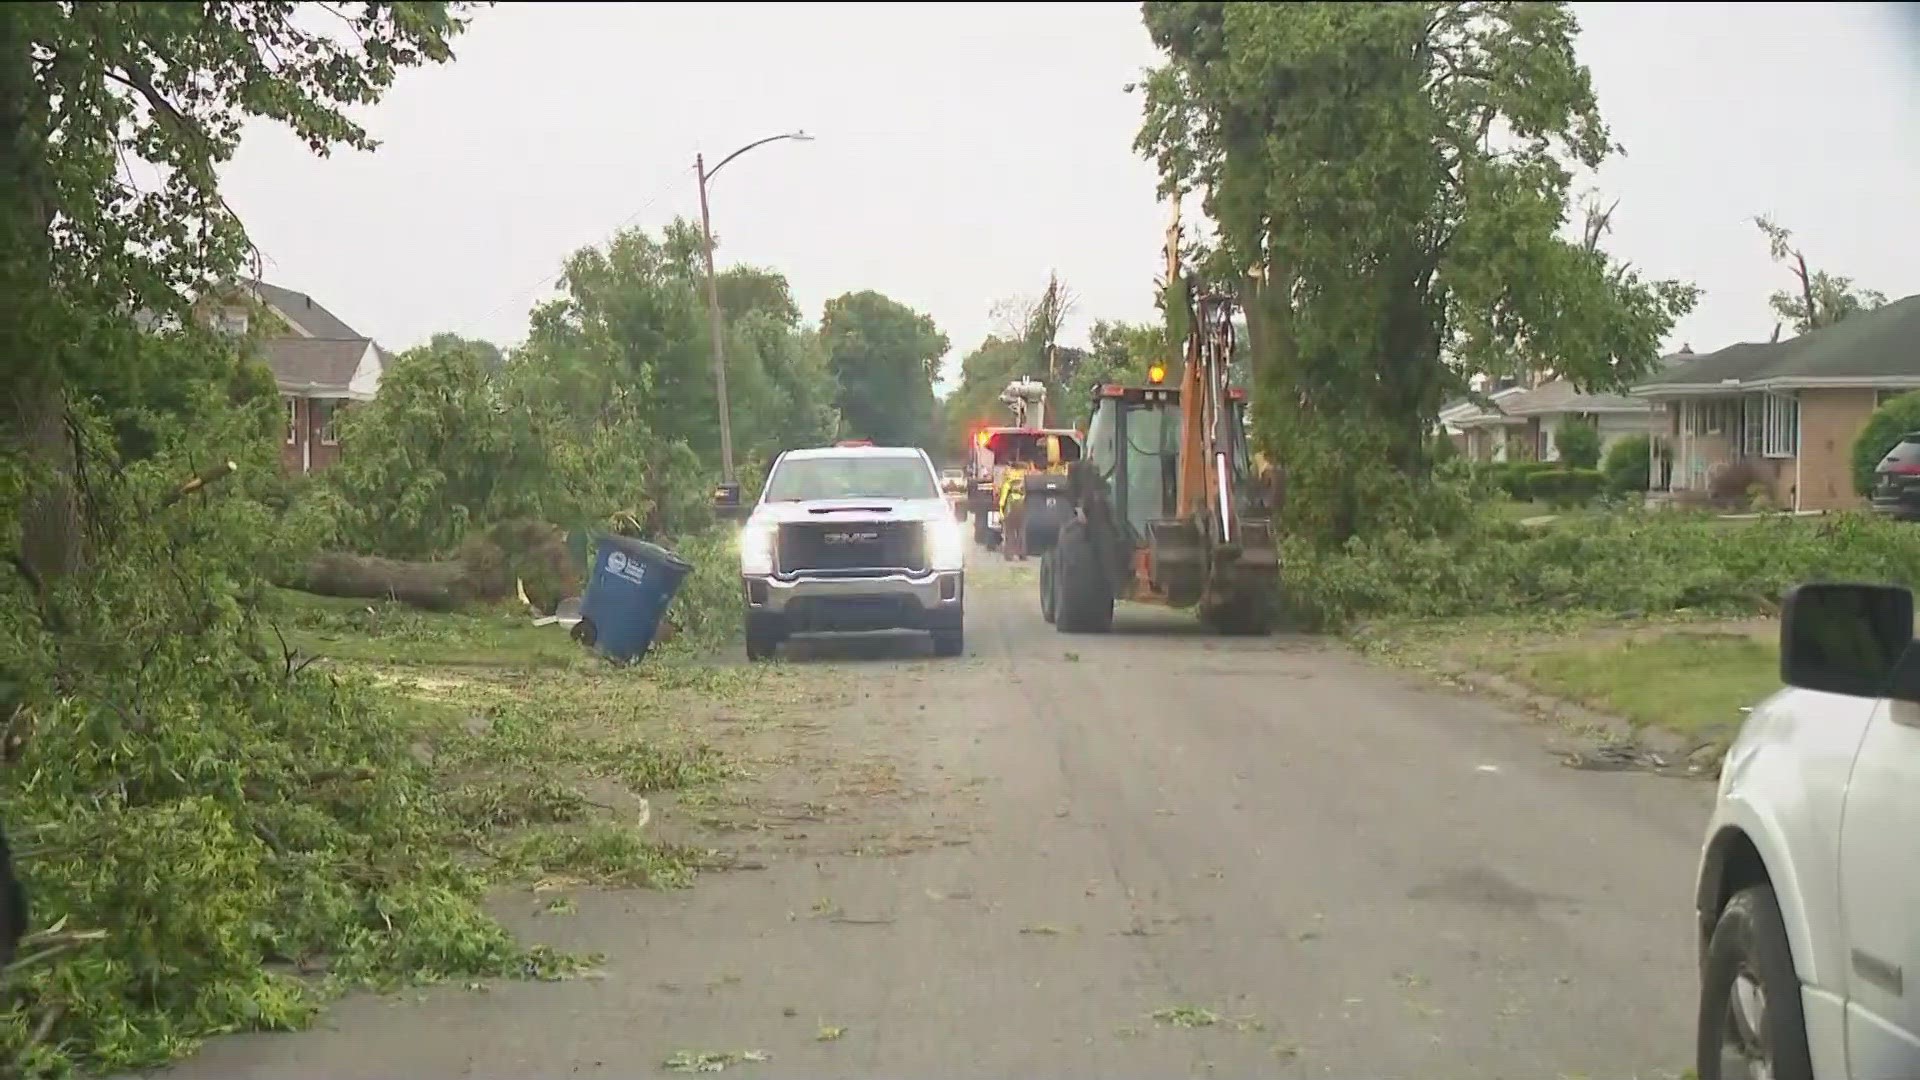 Crews are continuing to clean up several trees and branches from roadways following Thursday evening's storm.